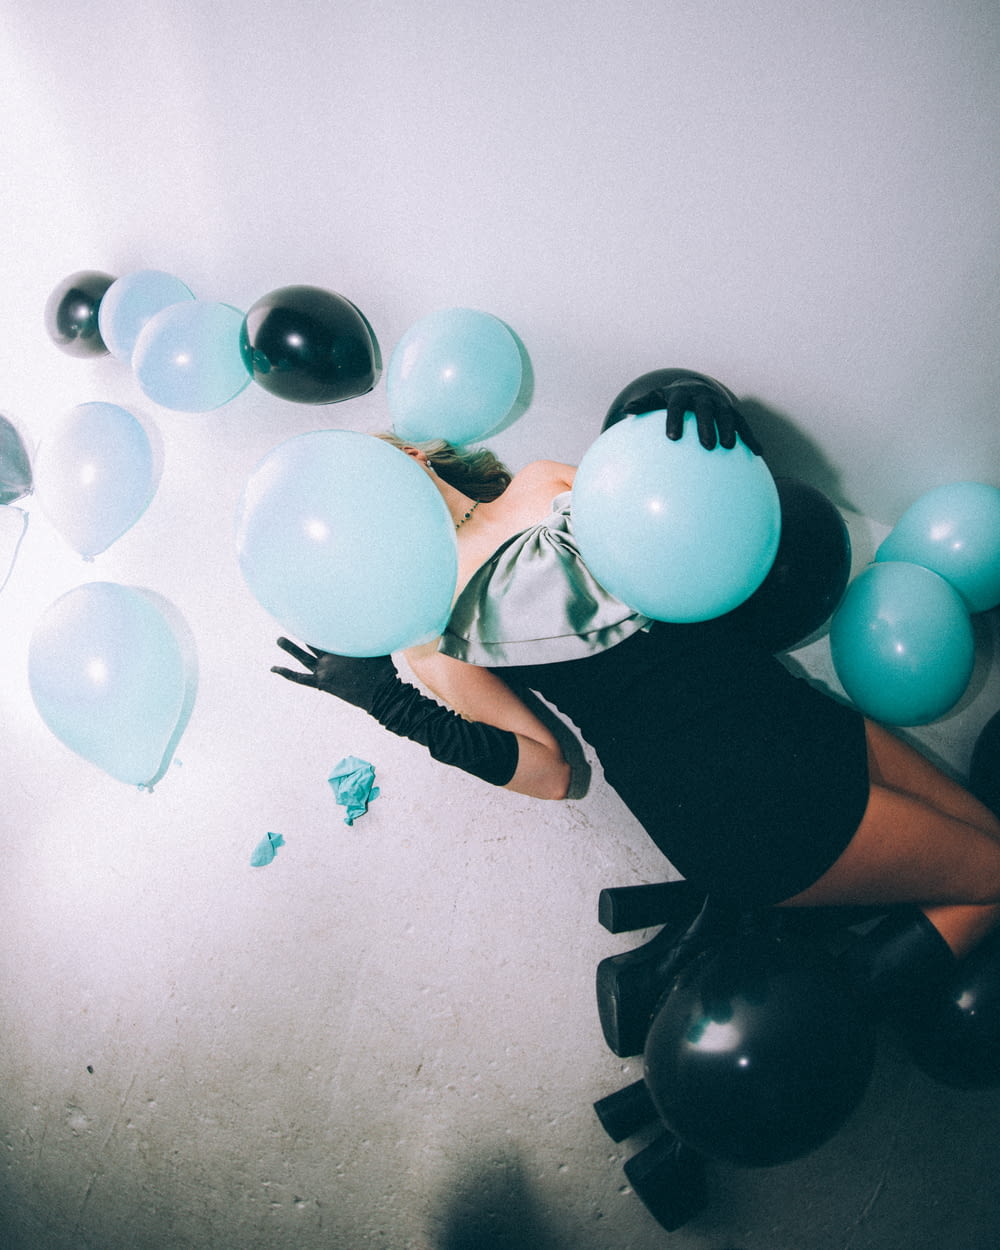 a woman in a black dress is surrounded by balloons